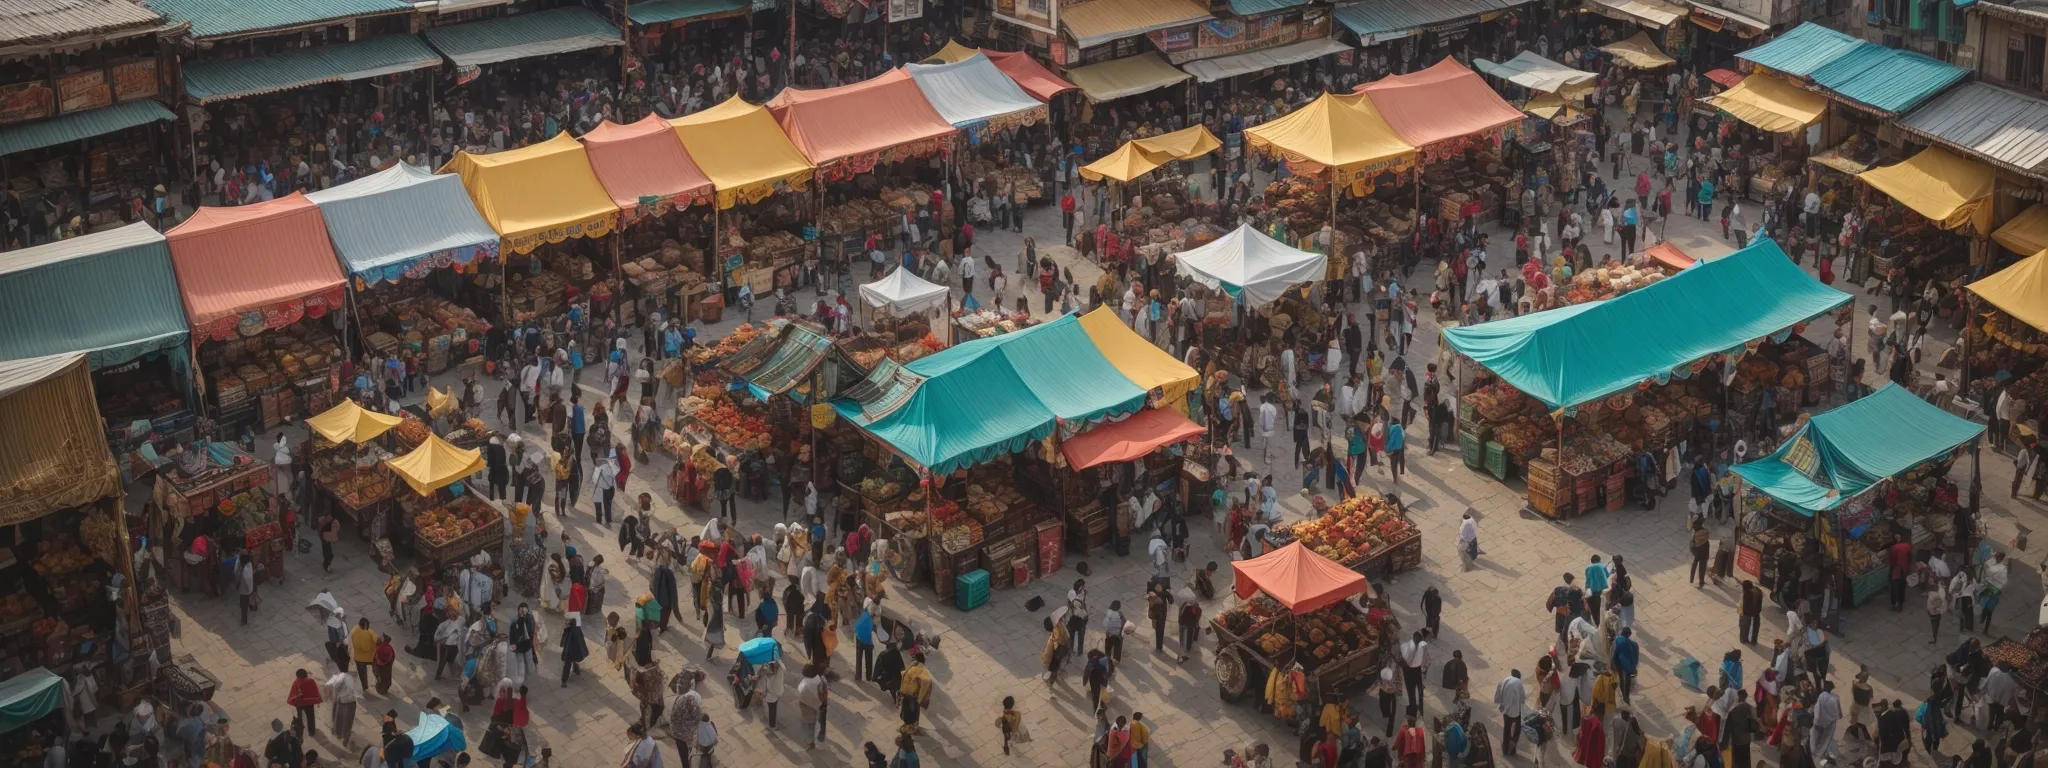 a bird's-eye view of a colorful, crowded marketplace with vendors and shoppers, illustrating the dynamics of online competition and visibility.